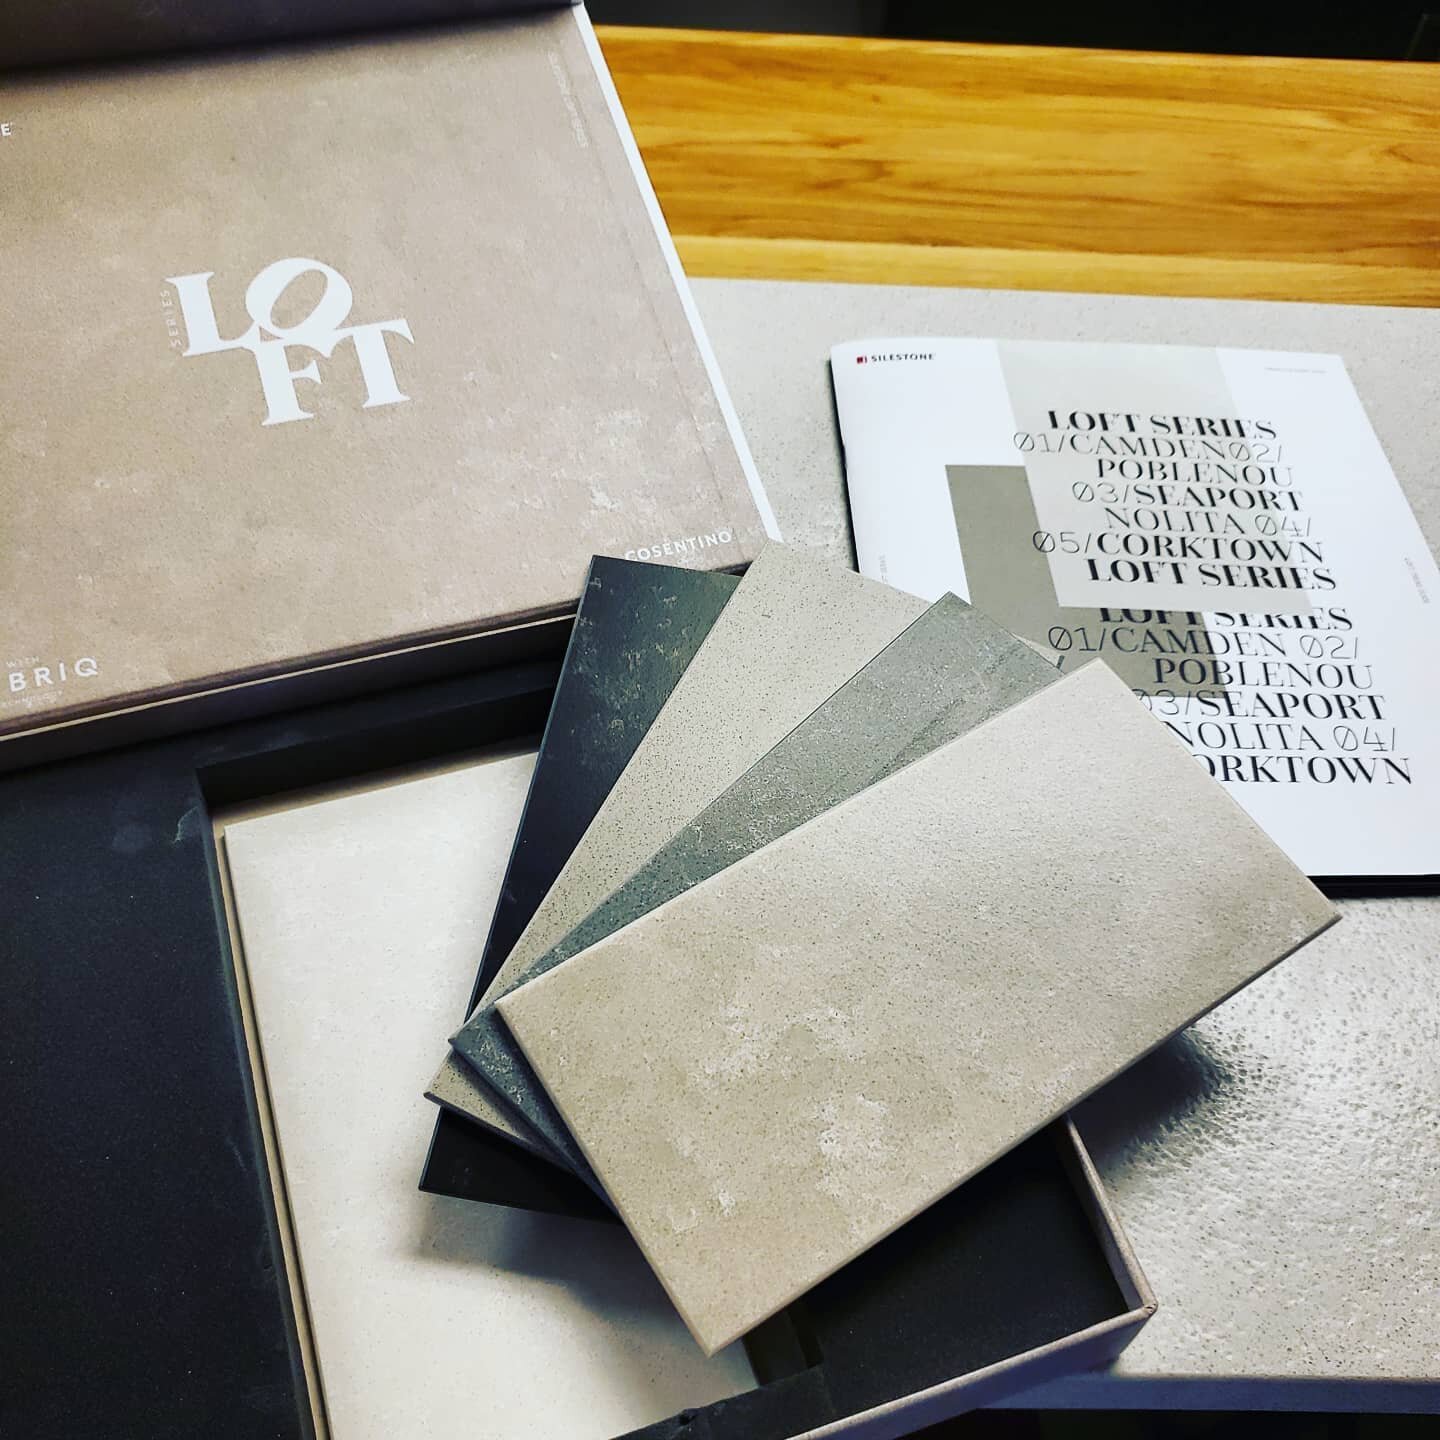 Samples have finally arrived for the @silestonebycosentino #LOFT series HybriQ engineered surfaces. Recycled glass is used in combination with quartz crystals for this sustainable product. Great for countertops and vertical panelling solutions. 
.
.#